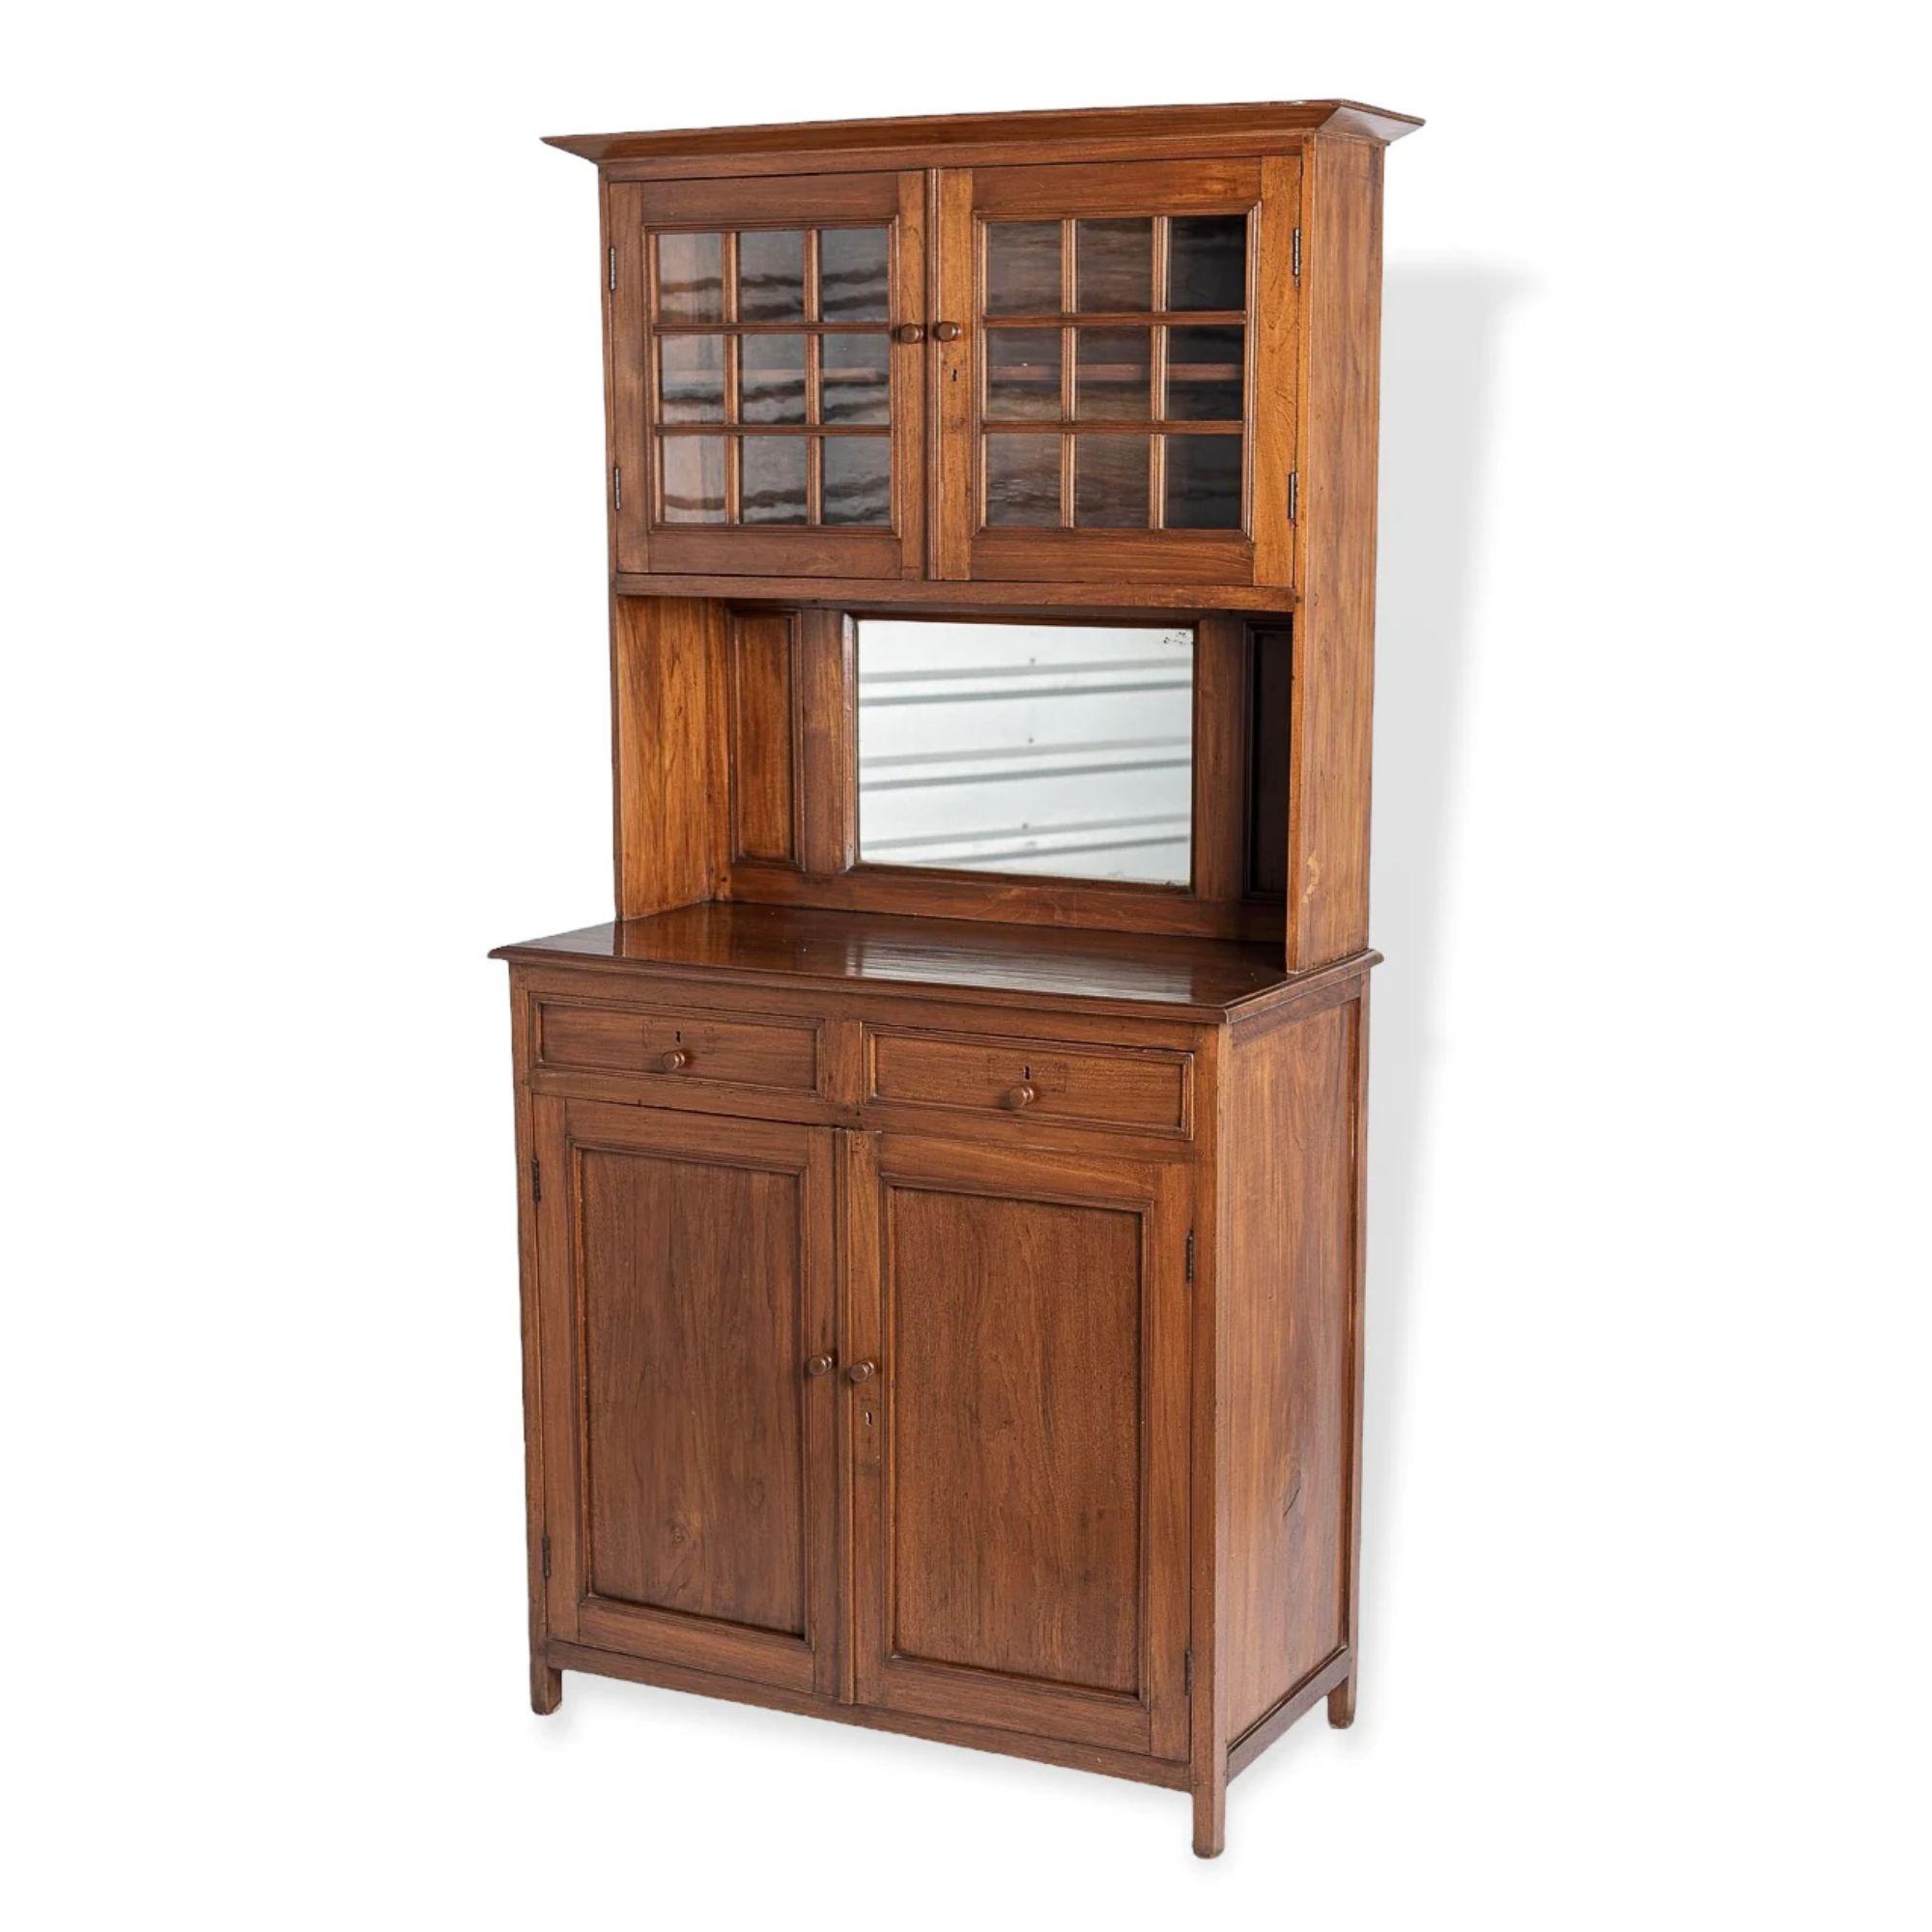 This incredible handcrafted late 19th century antique American solid wood farmhouse cabinet is perfectly aged with great rustic character. The unique and elegant design of this two-piece cabinet features an upper step-back hutch with nine glass pane